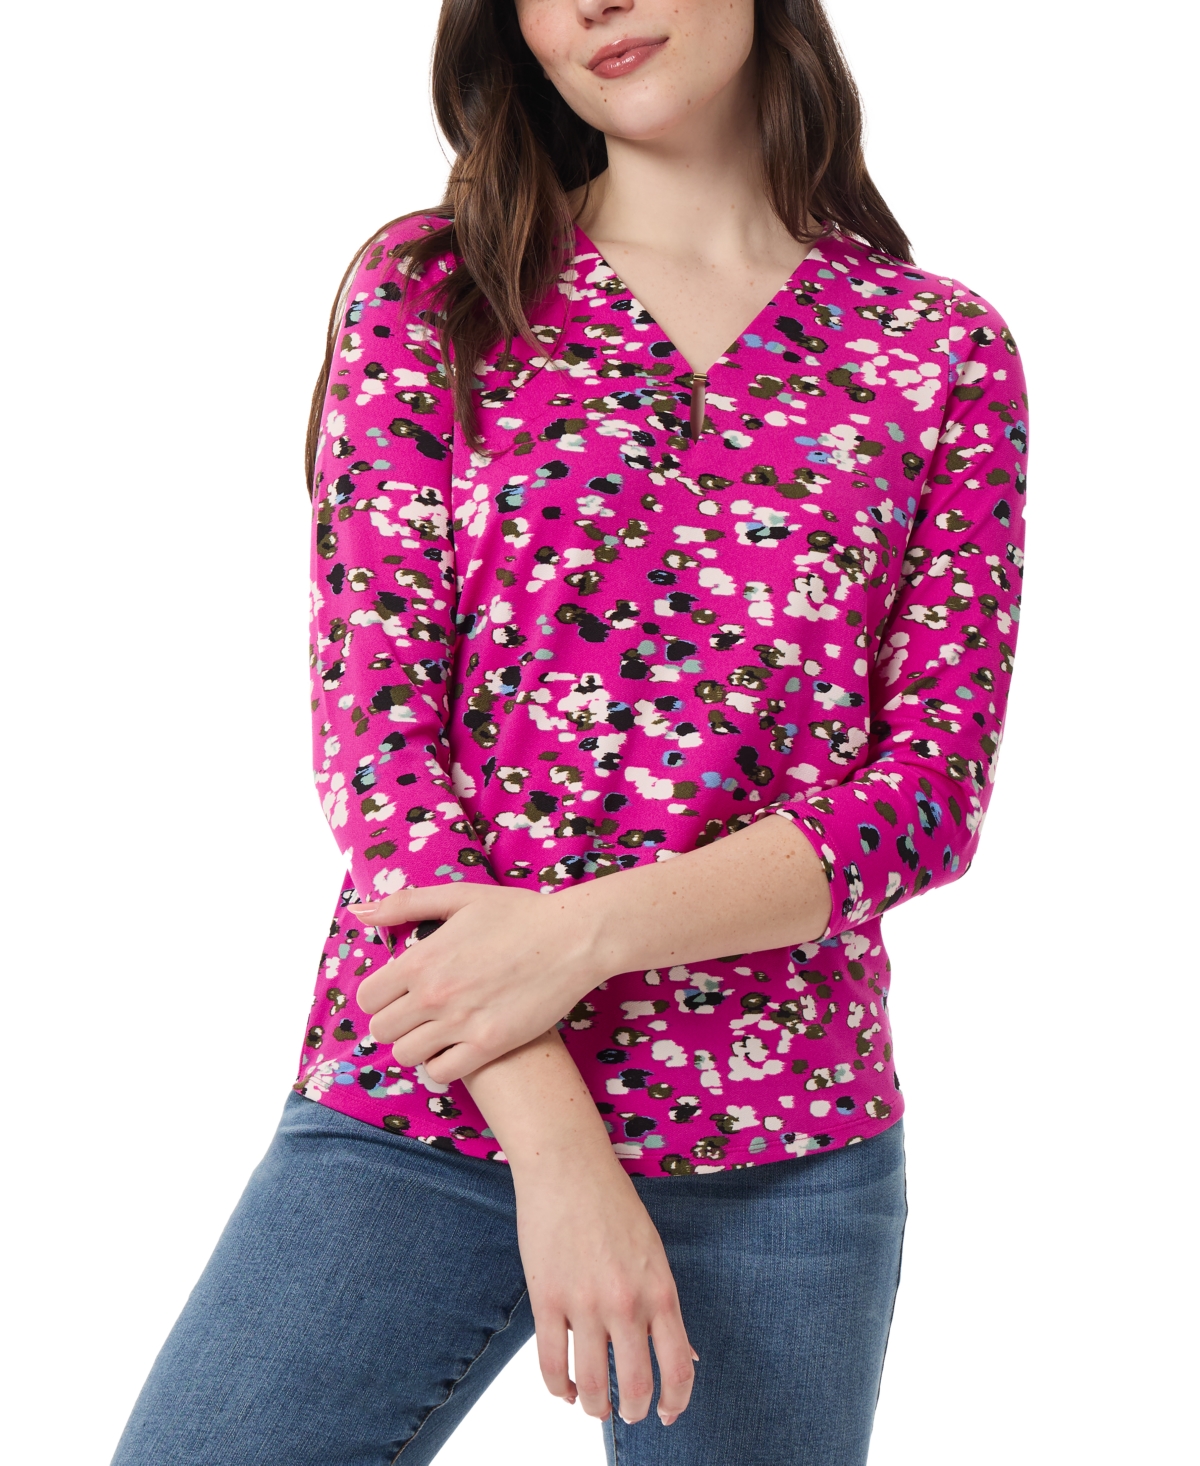 Women's Printed Moss-Crepe 3/4-Sleeve Top - Bright Orchid